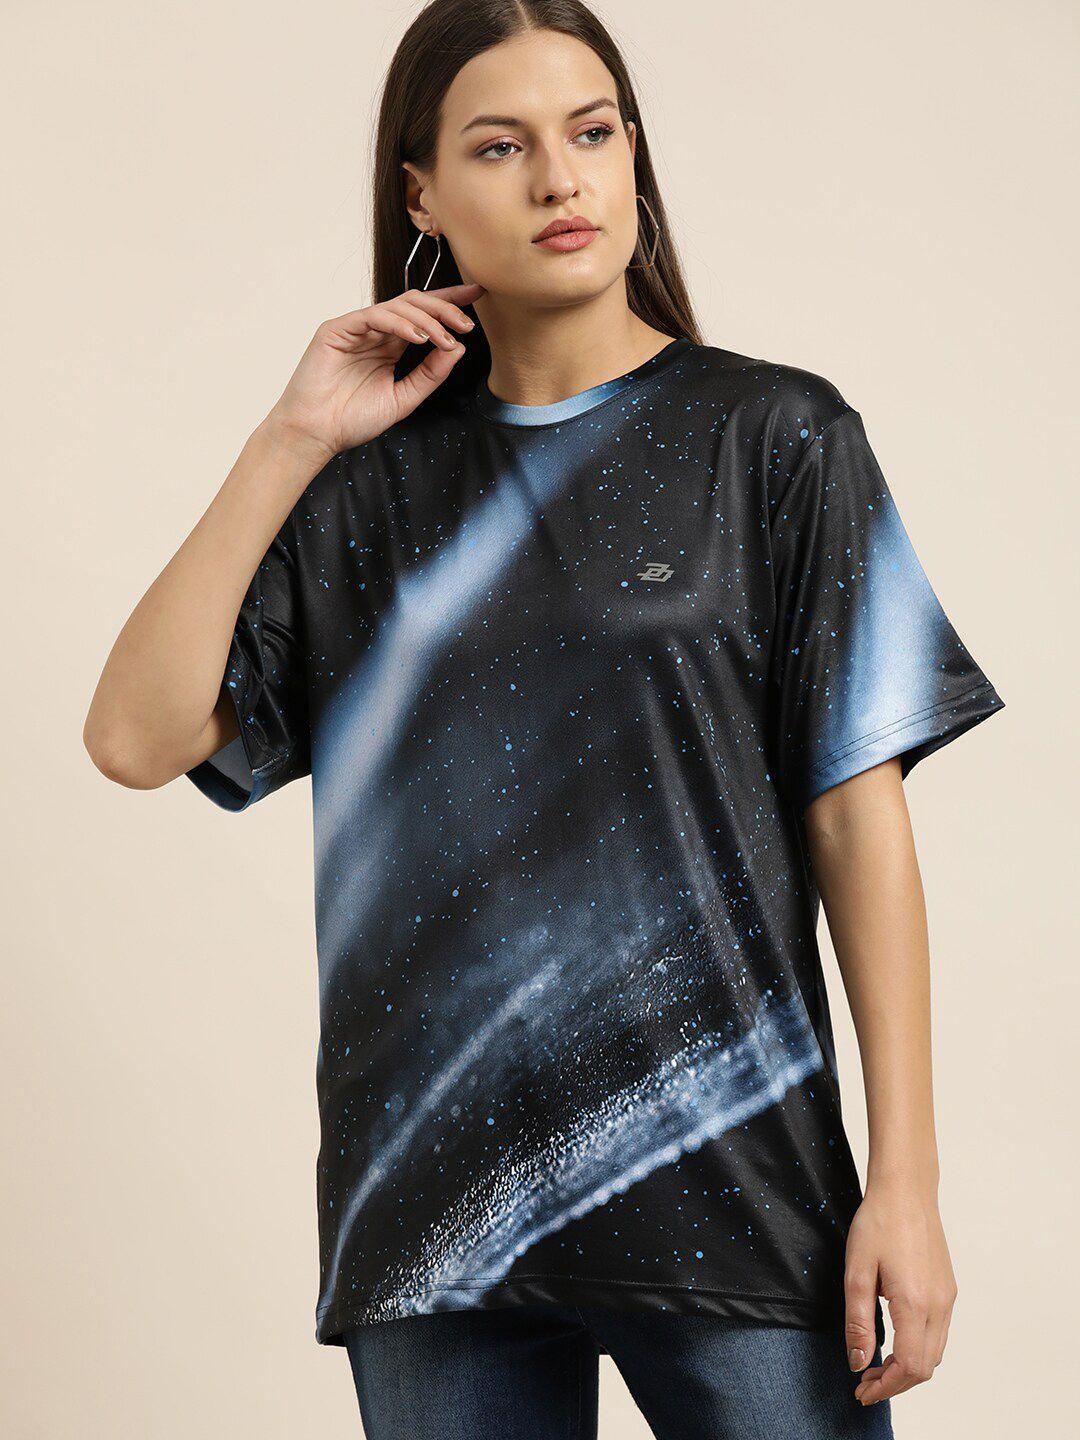 difference of opinion navy blue abstract printed loose t-shirt